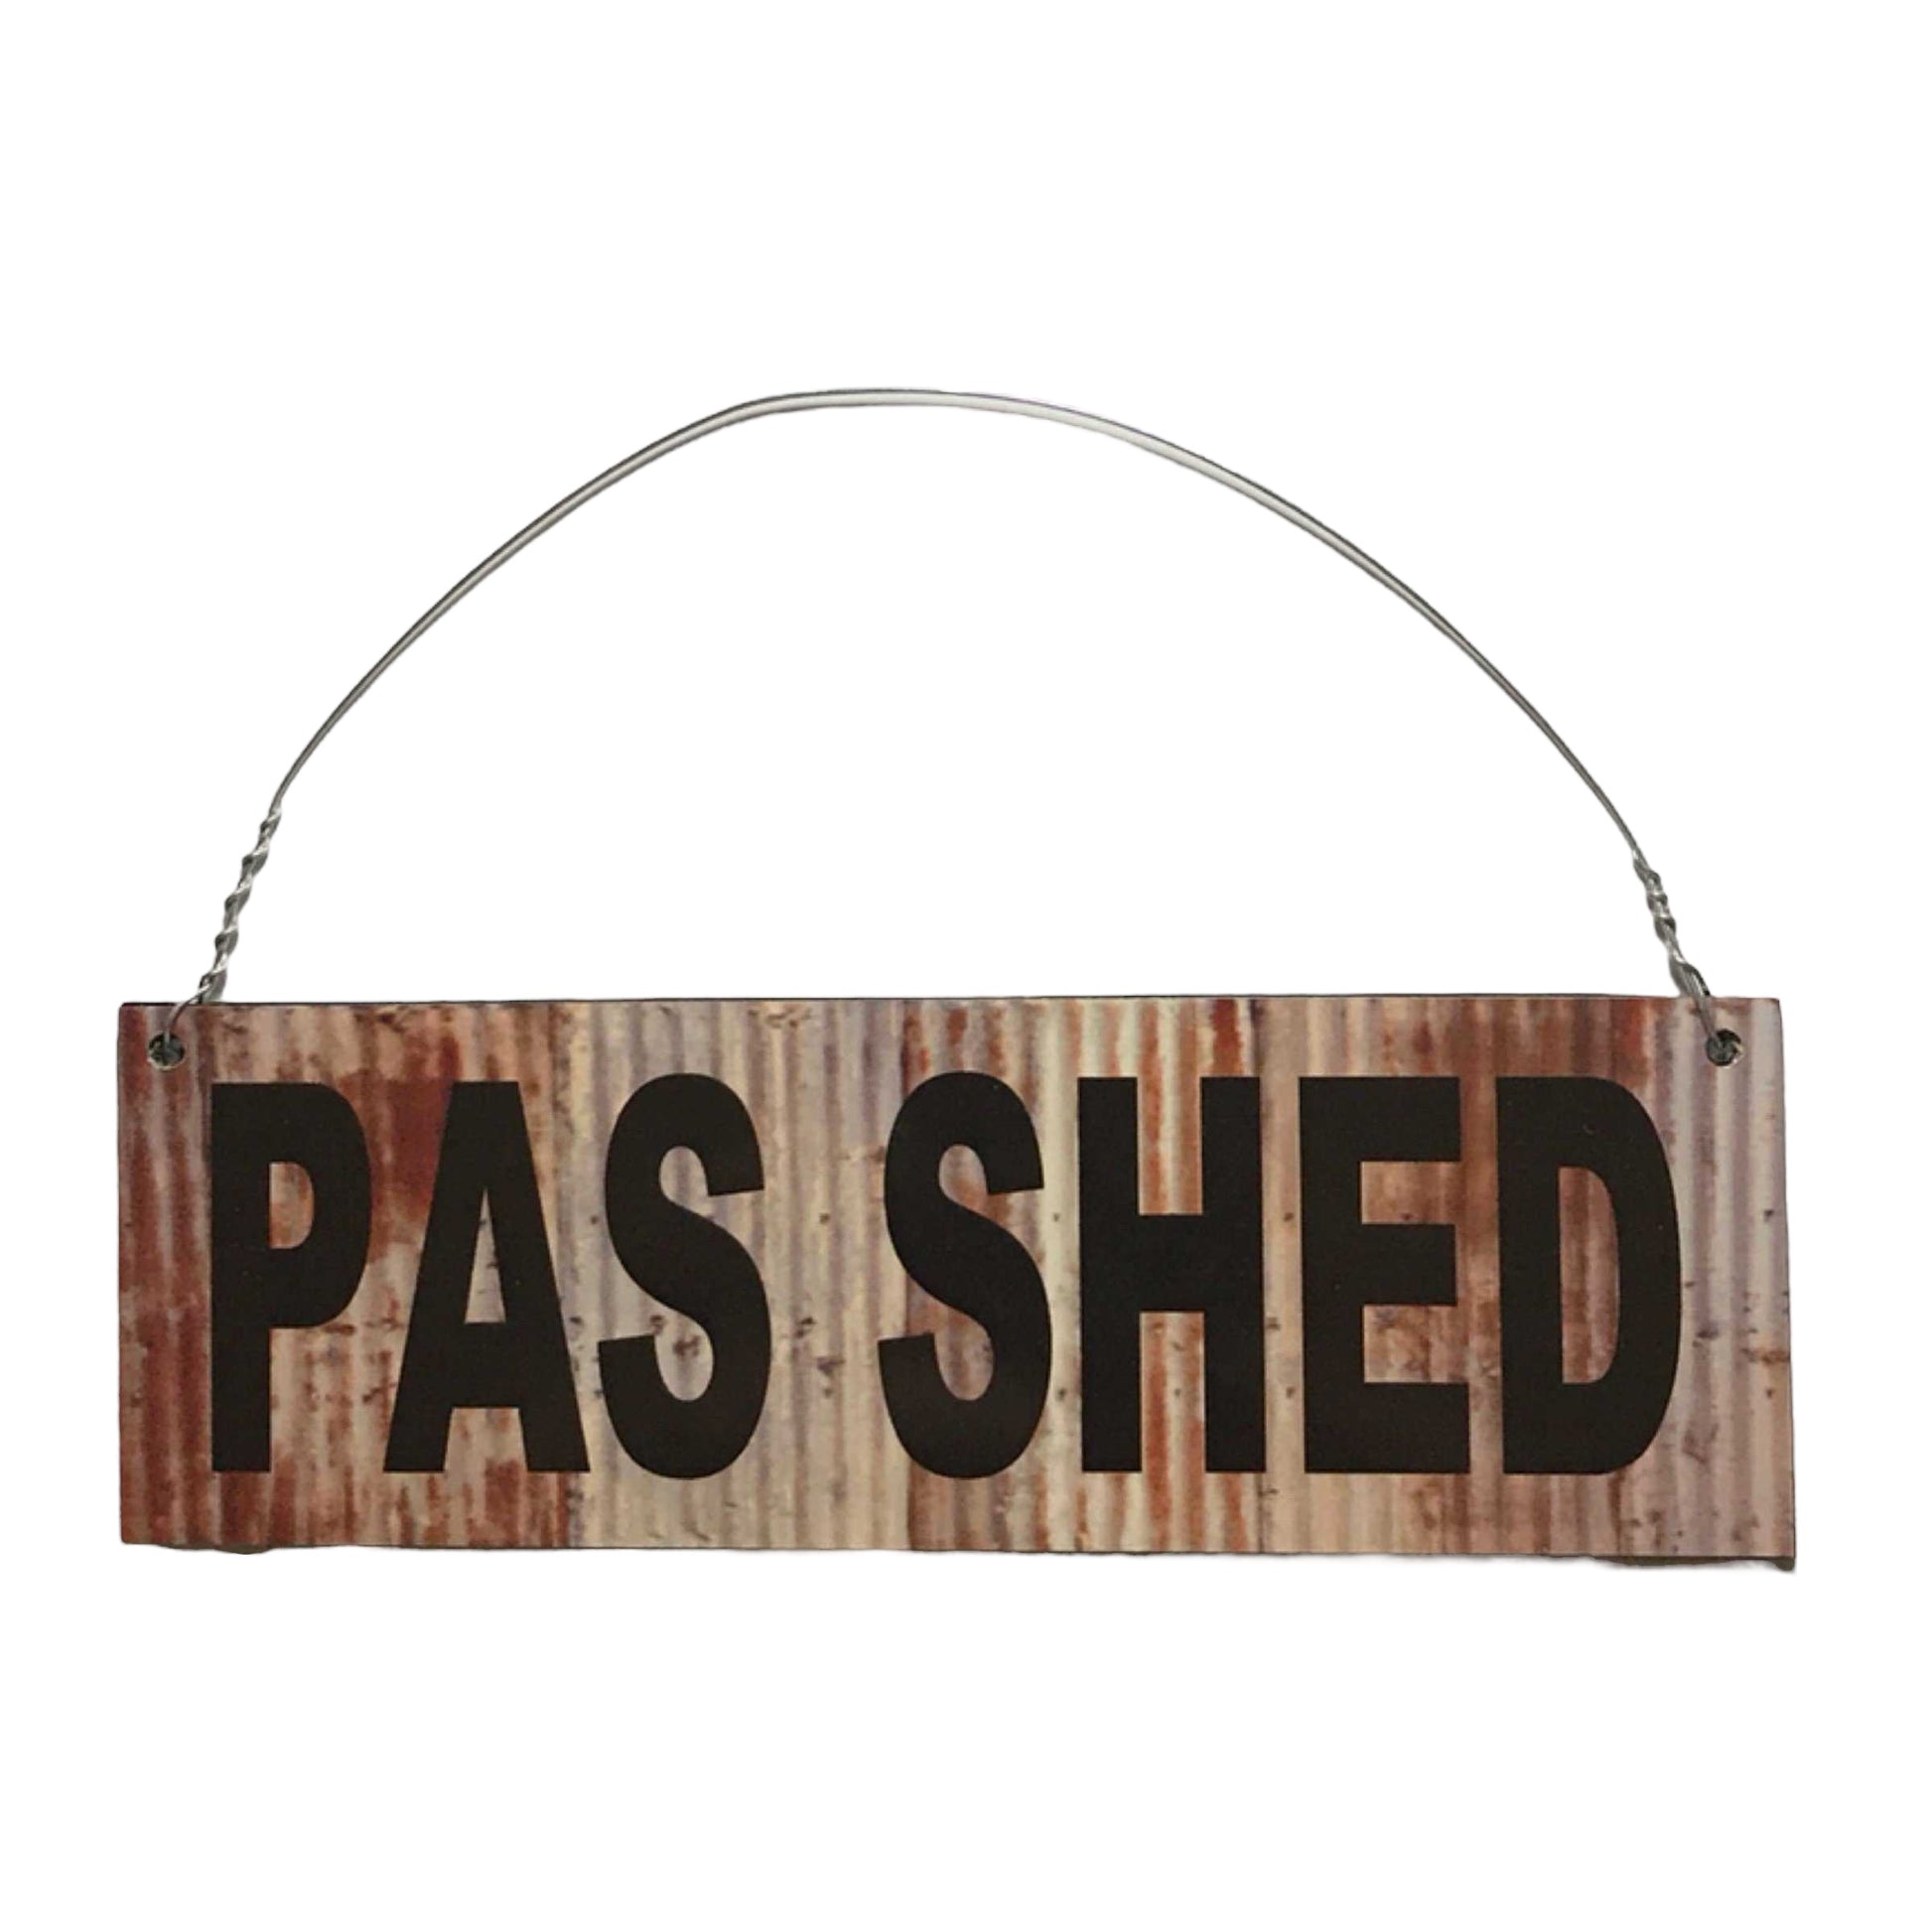 Pas Shed Rusty Style Sign - The Renmy Store Homewares & Gifts 